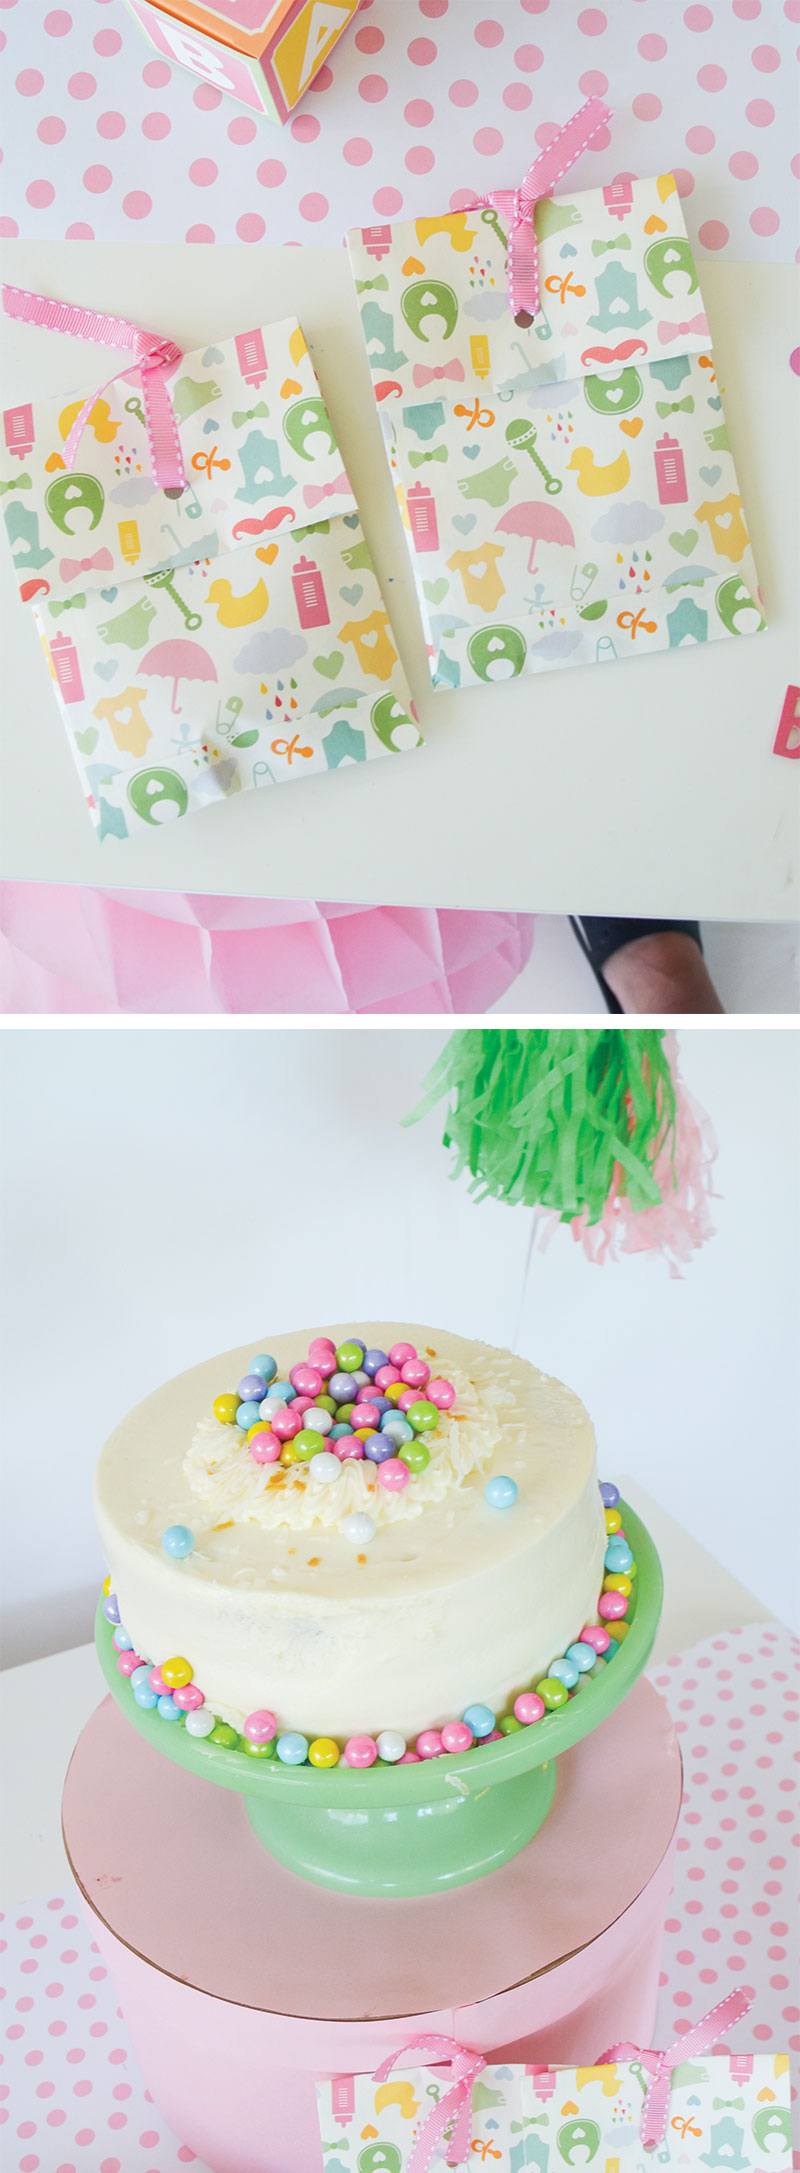 Shower With Love Baby Shower by Lindi Haws of Love The Day